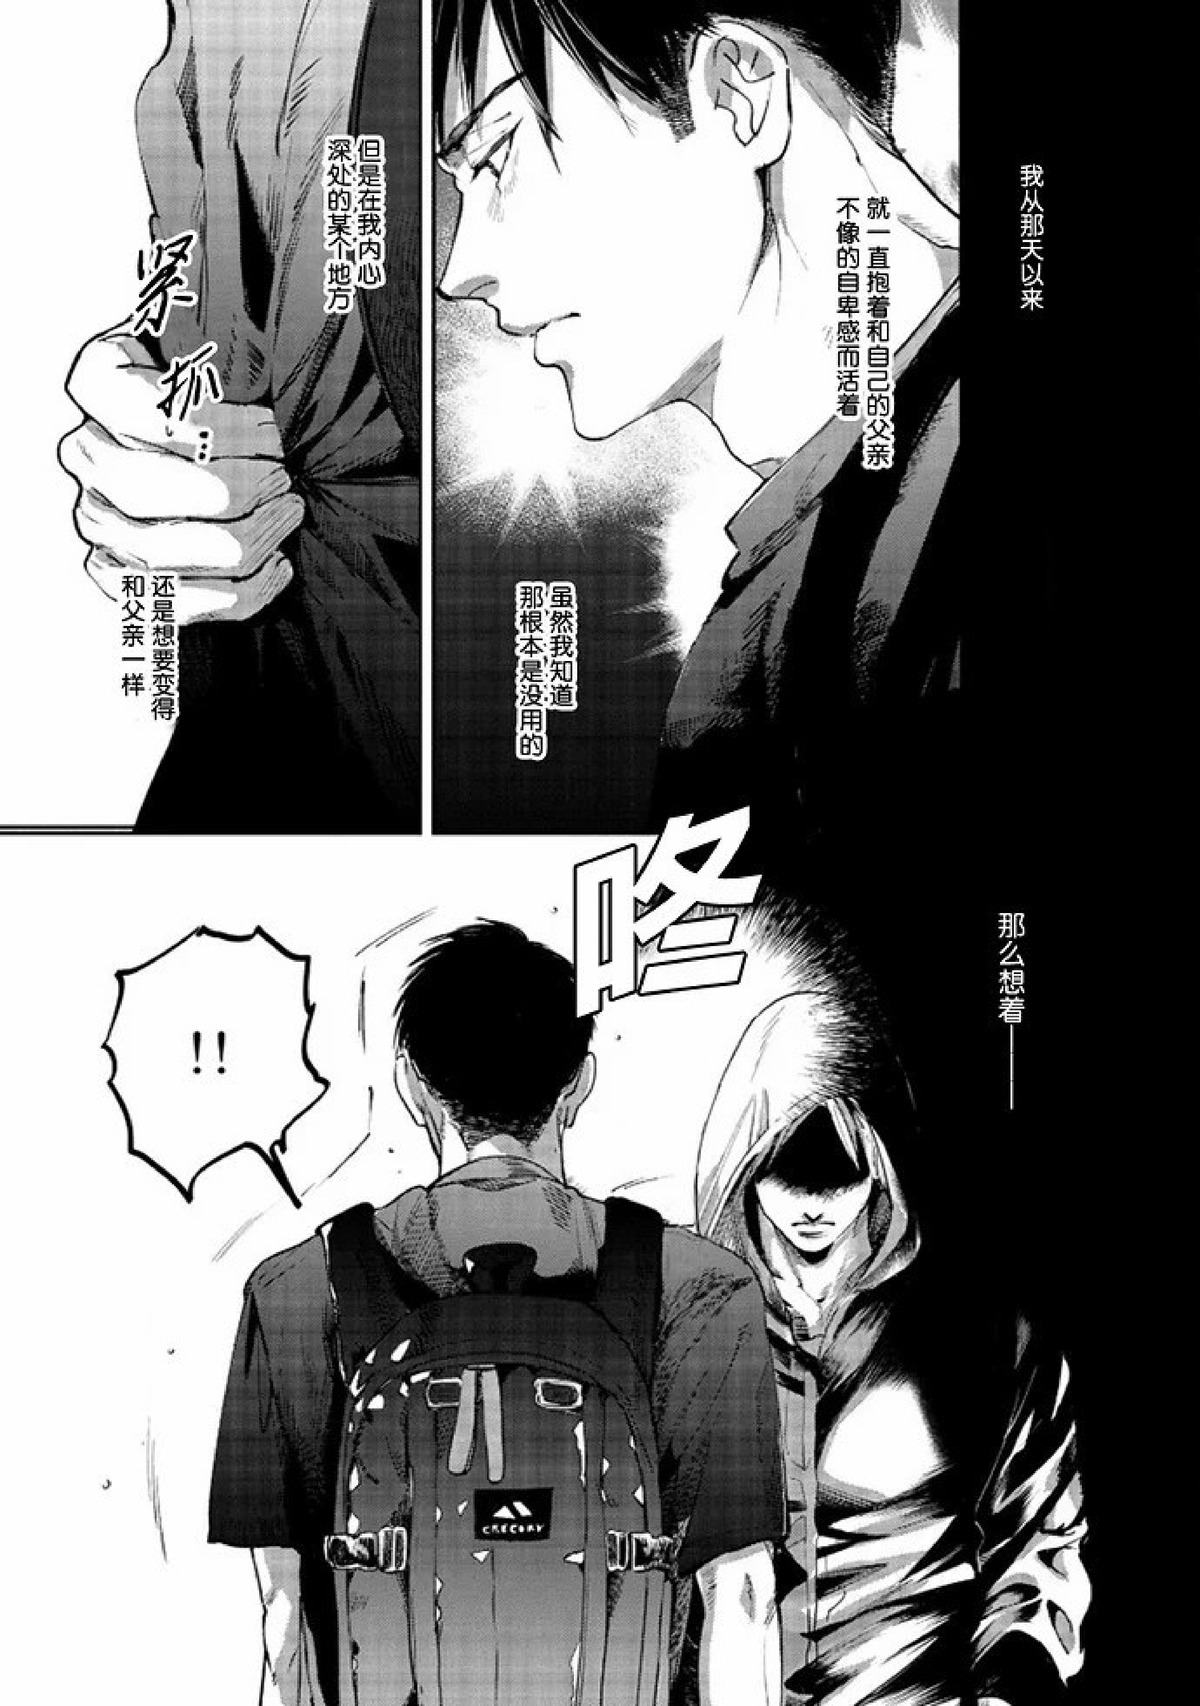 【Two sides of the same coin[耽美]】漫画-（上卷01-02）章节漫画下拉式图片-33.jpg